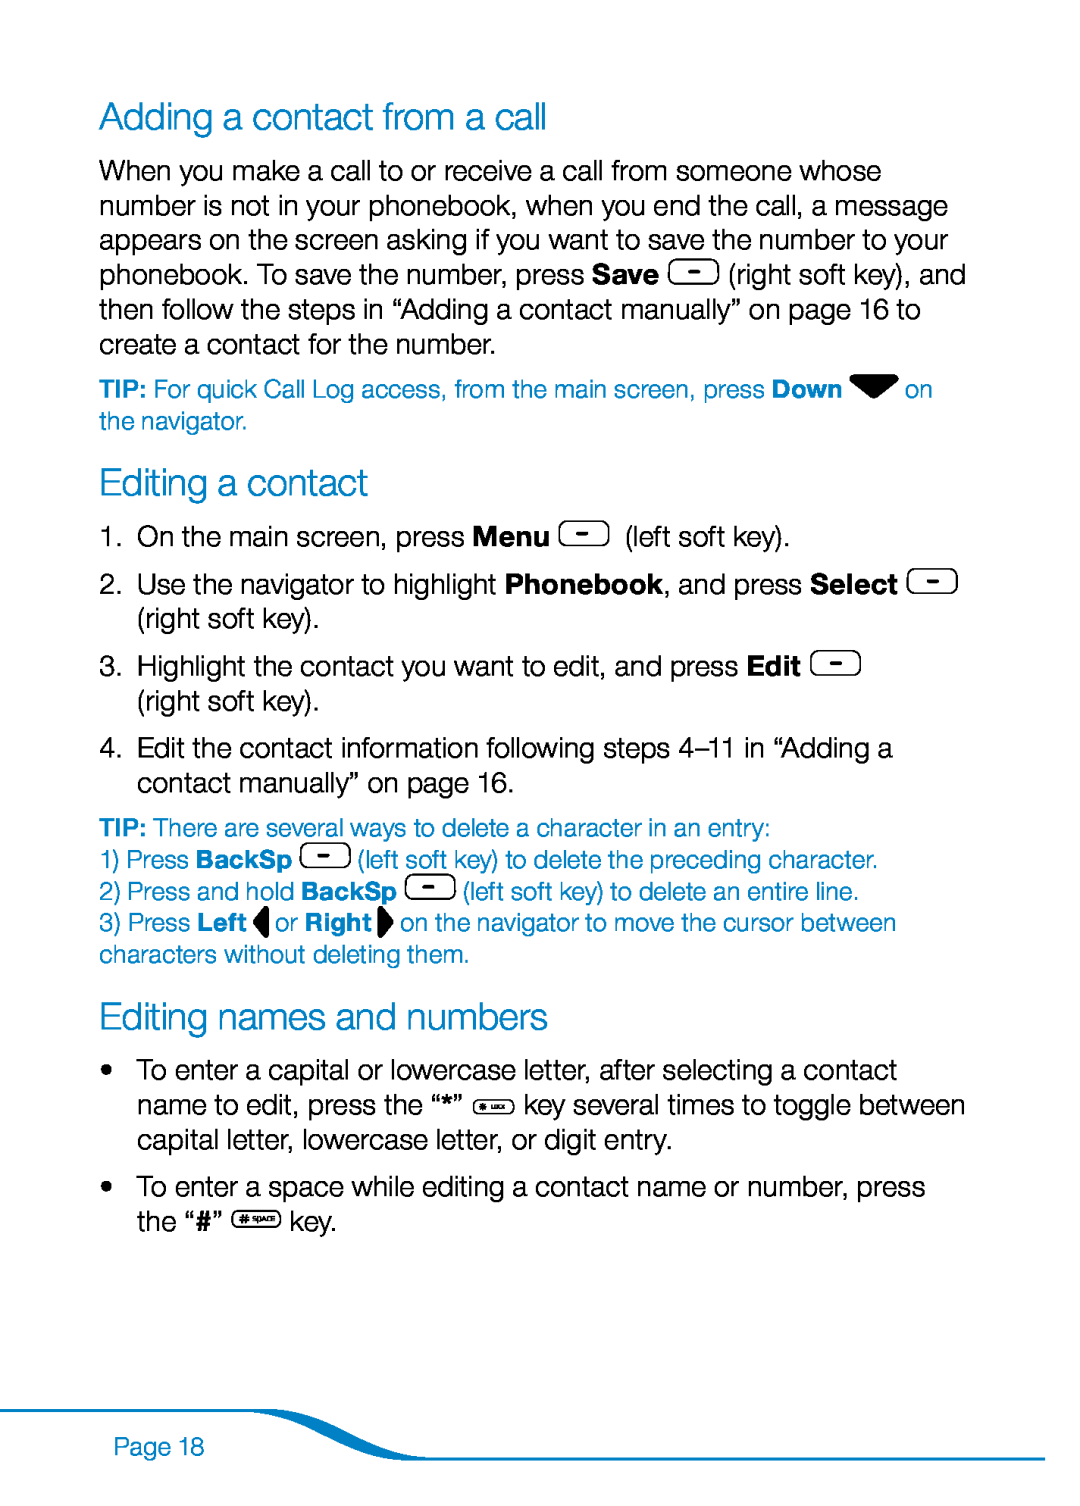 Plantronics 655 manual Adding a contact from a call, Editing a contact, Editing names and numbers 